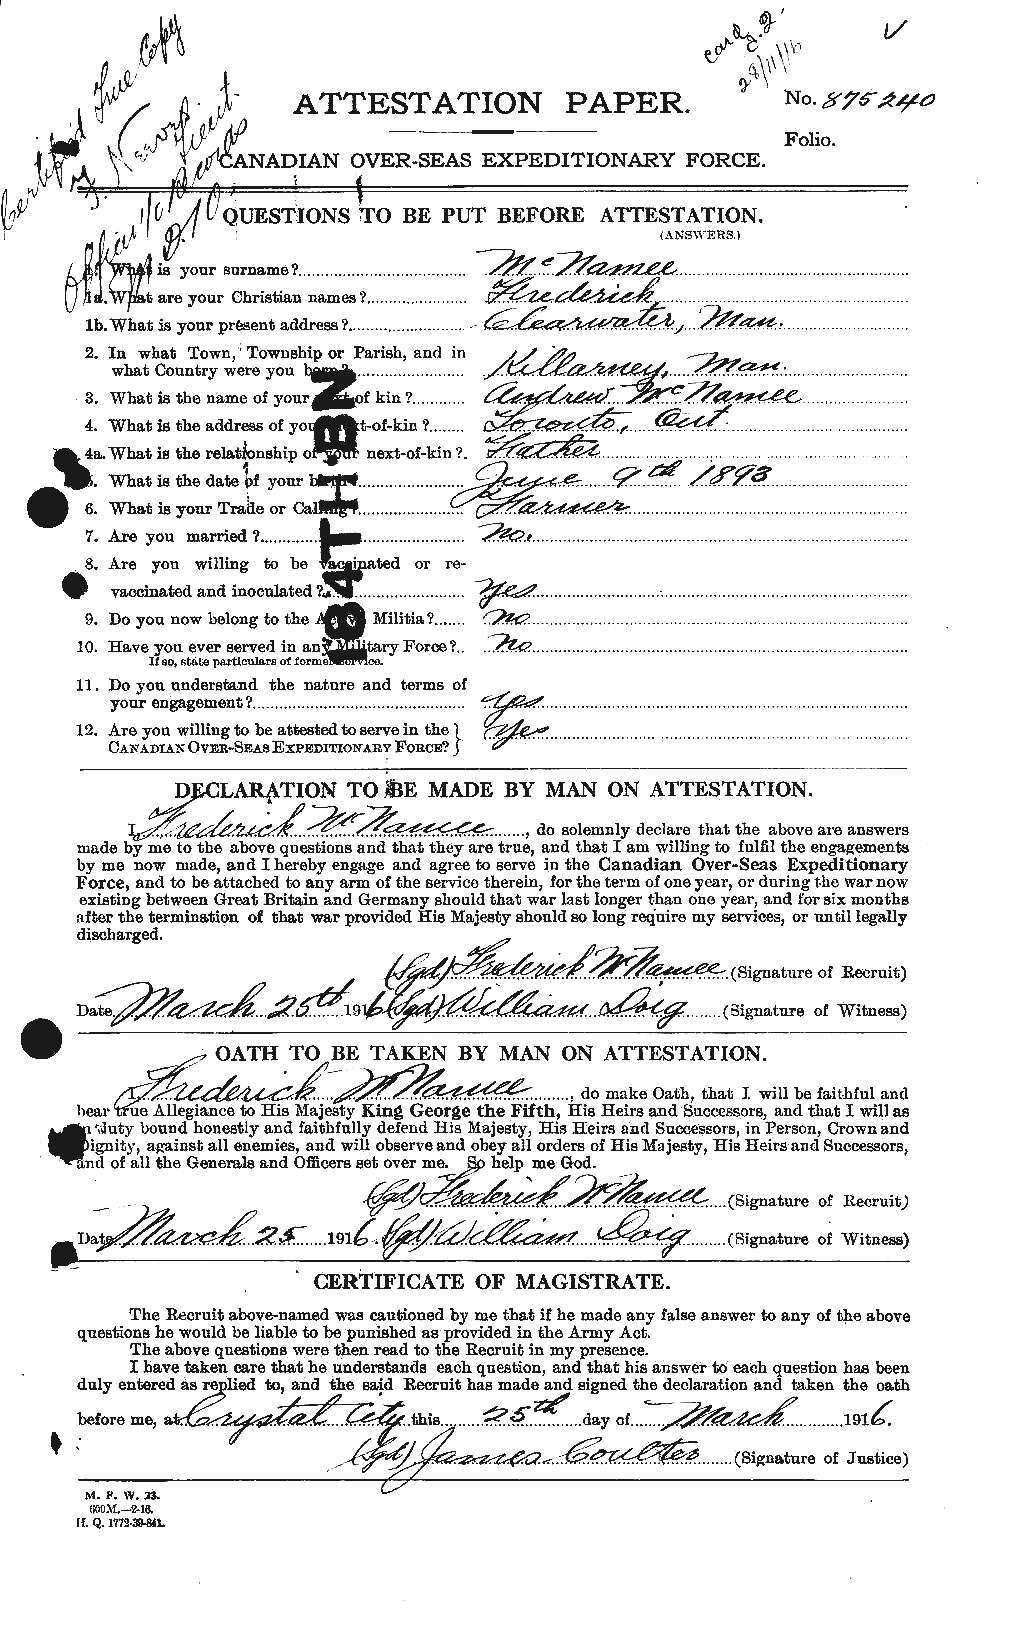 Personnel Records of the First World War - CEF 538327a